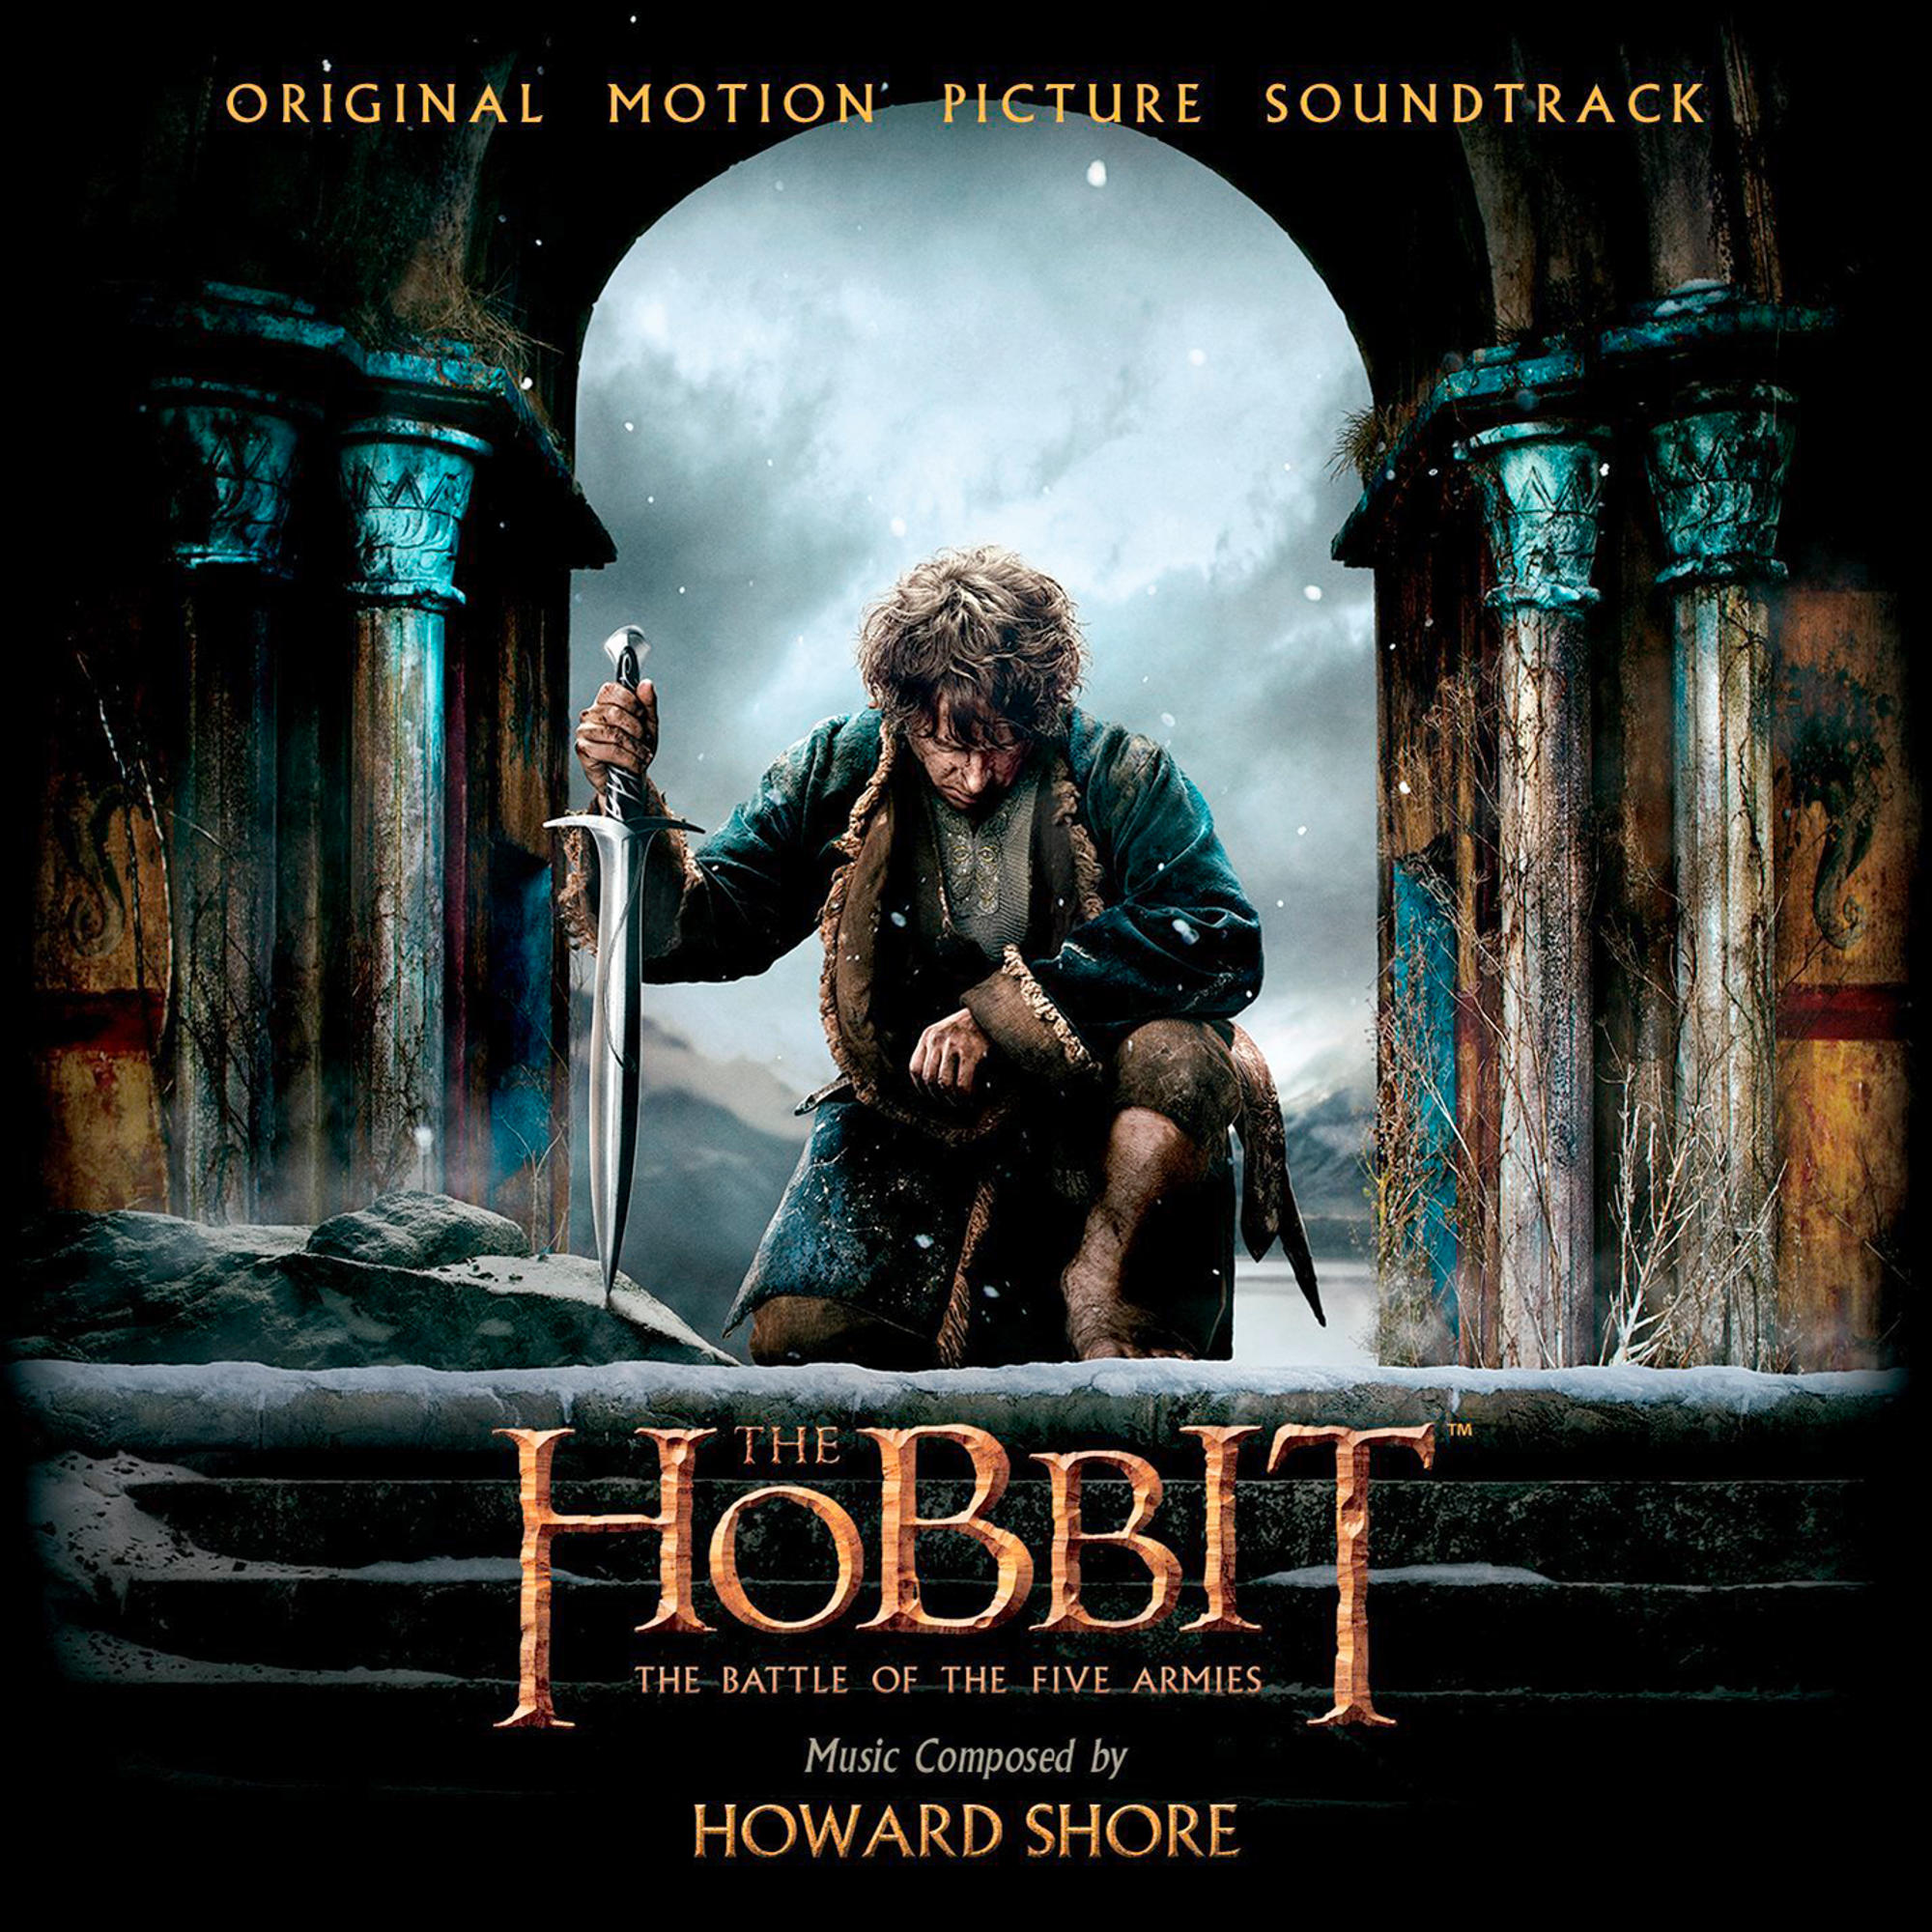 Howard Shore - The Hobbit: Of The (CD) - The Battle Armies Five